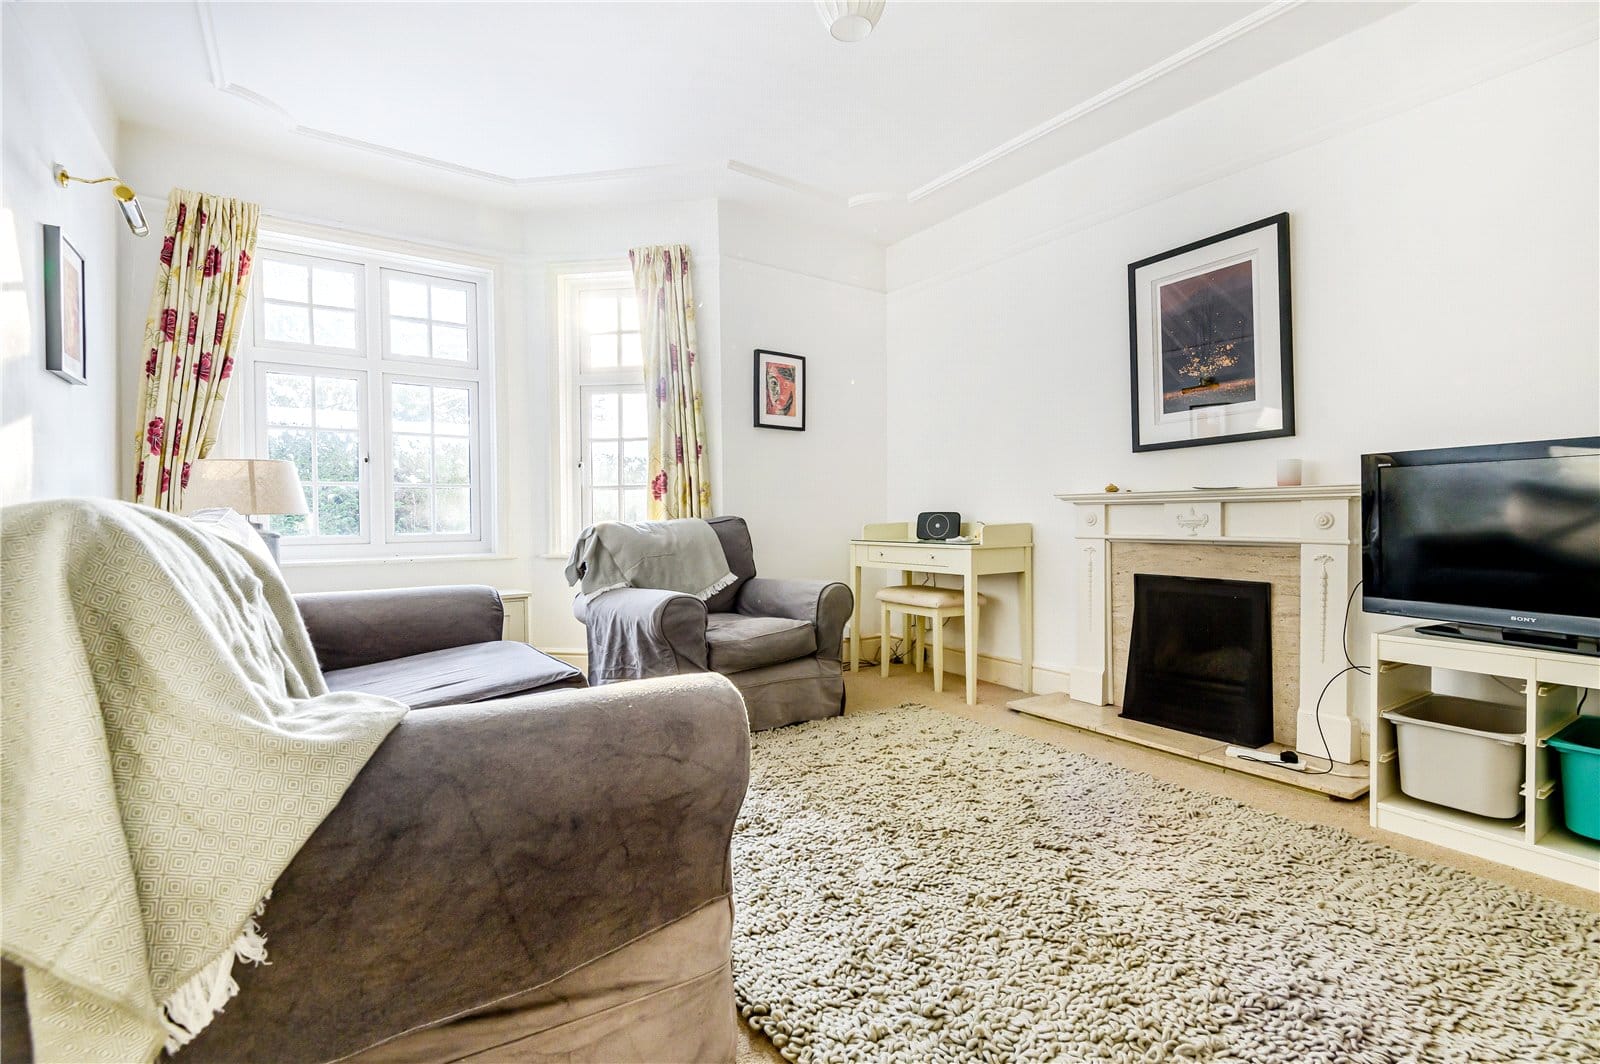 Mayfield Lane, Wadhurst, East Sussex,  | residential-sales